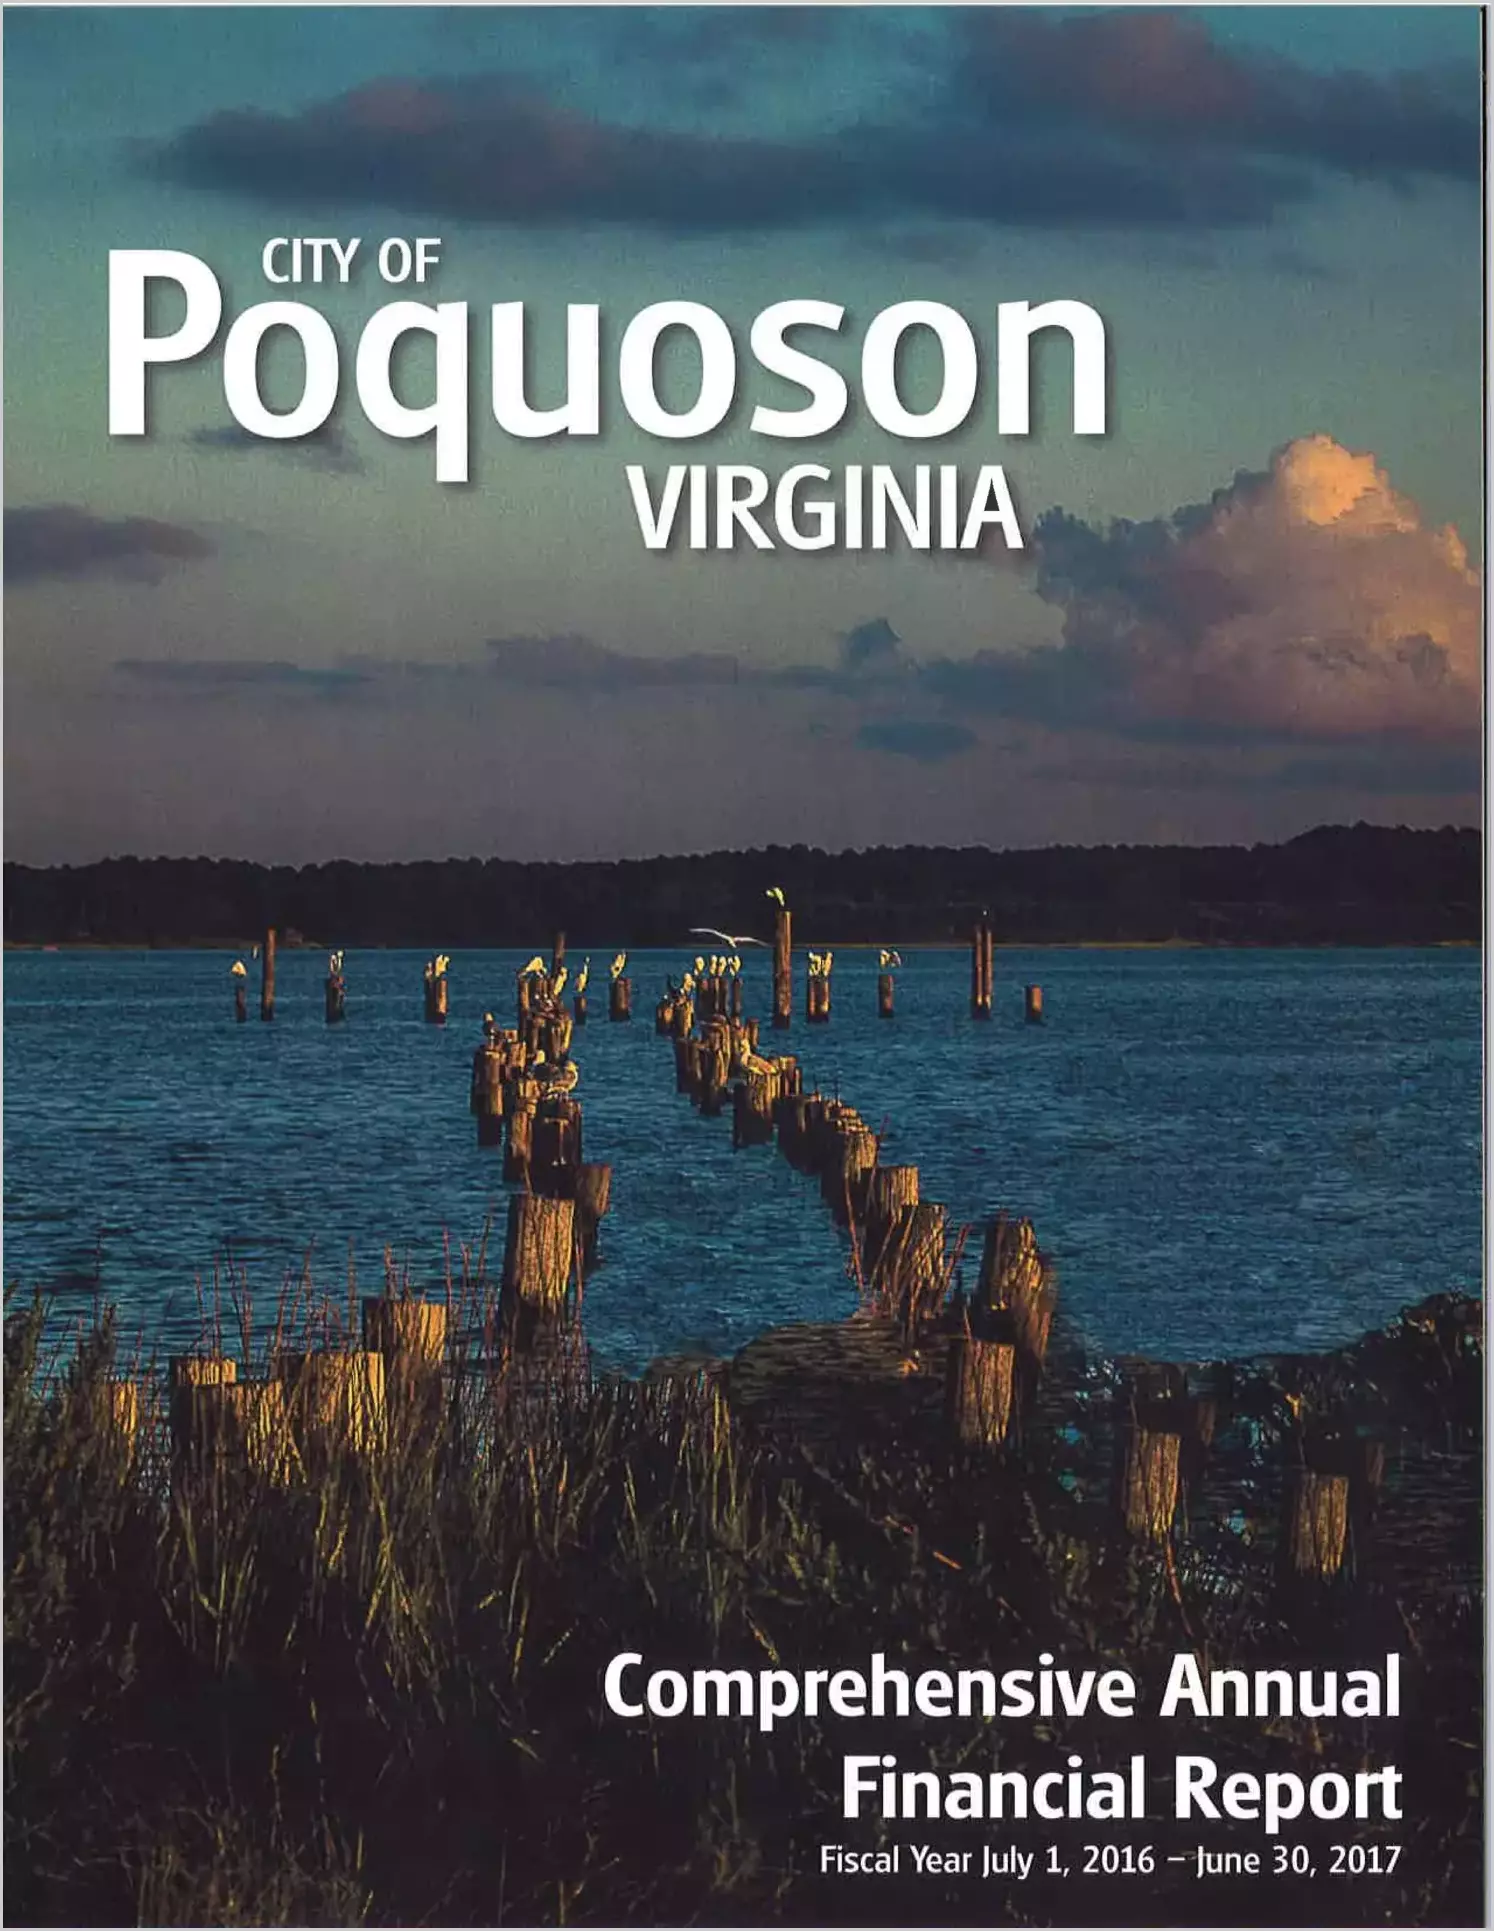 2017 Annual Financial Report for City of Poquoson